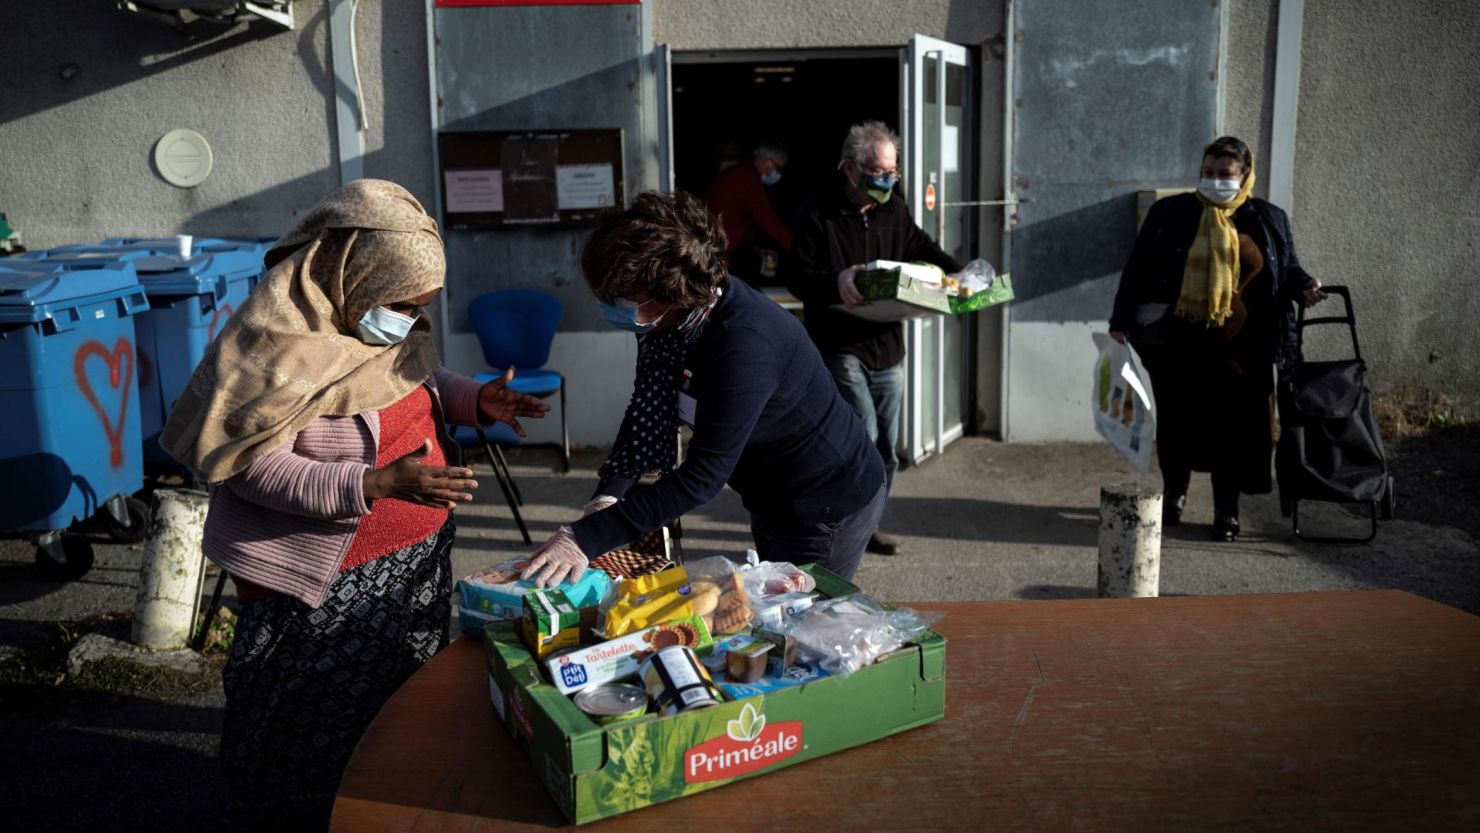 Volunteers of the charity Restos du Coeur distribute food in Toulouse, southern France in November.